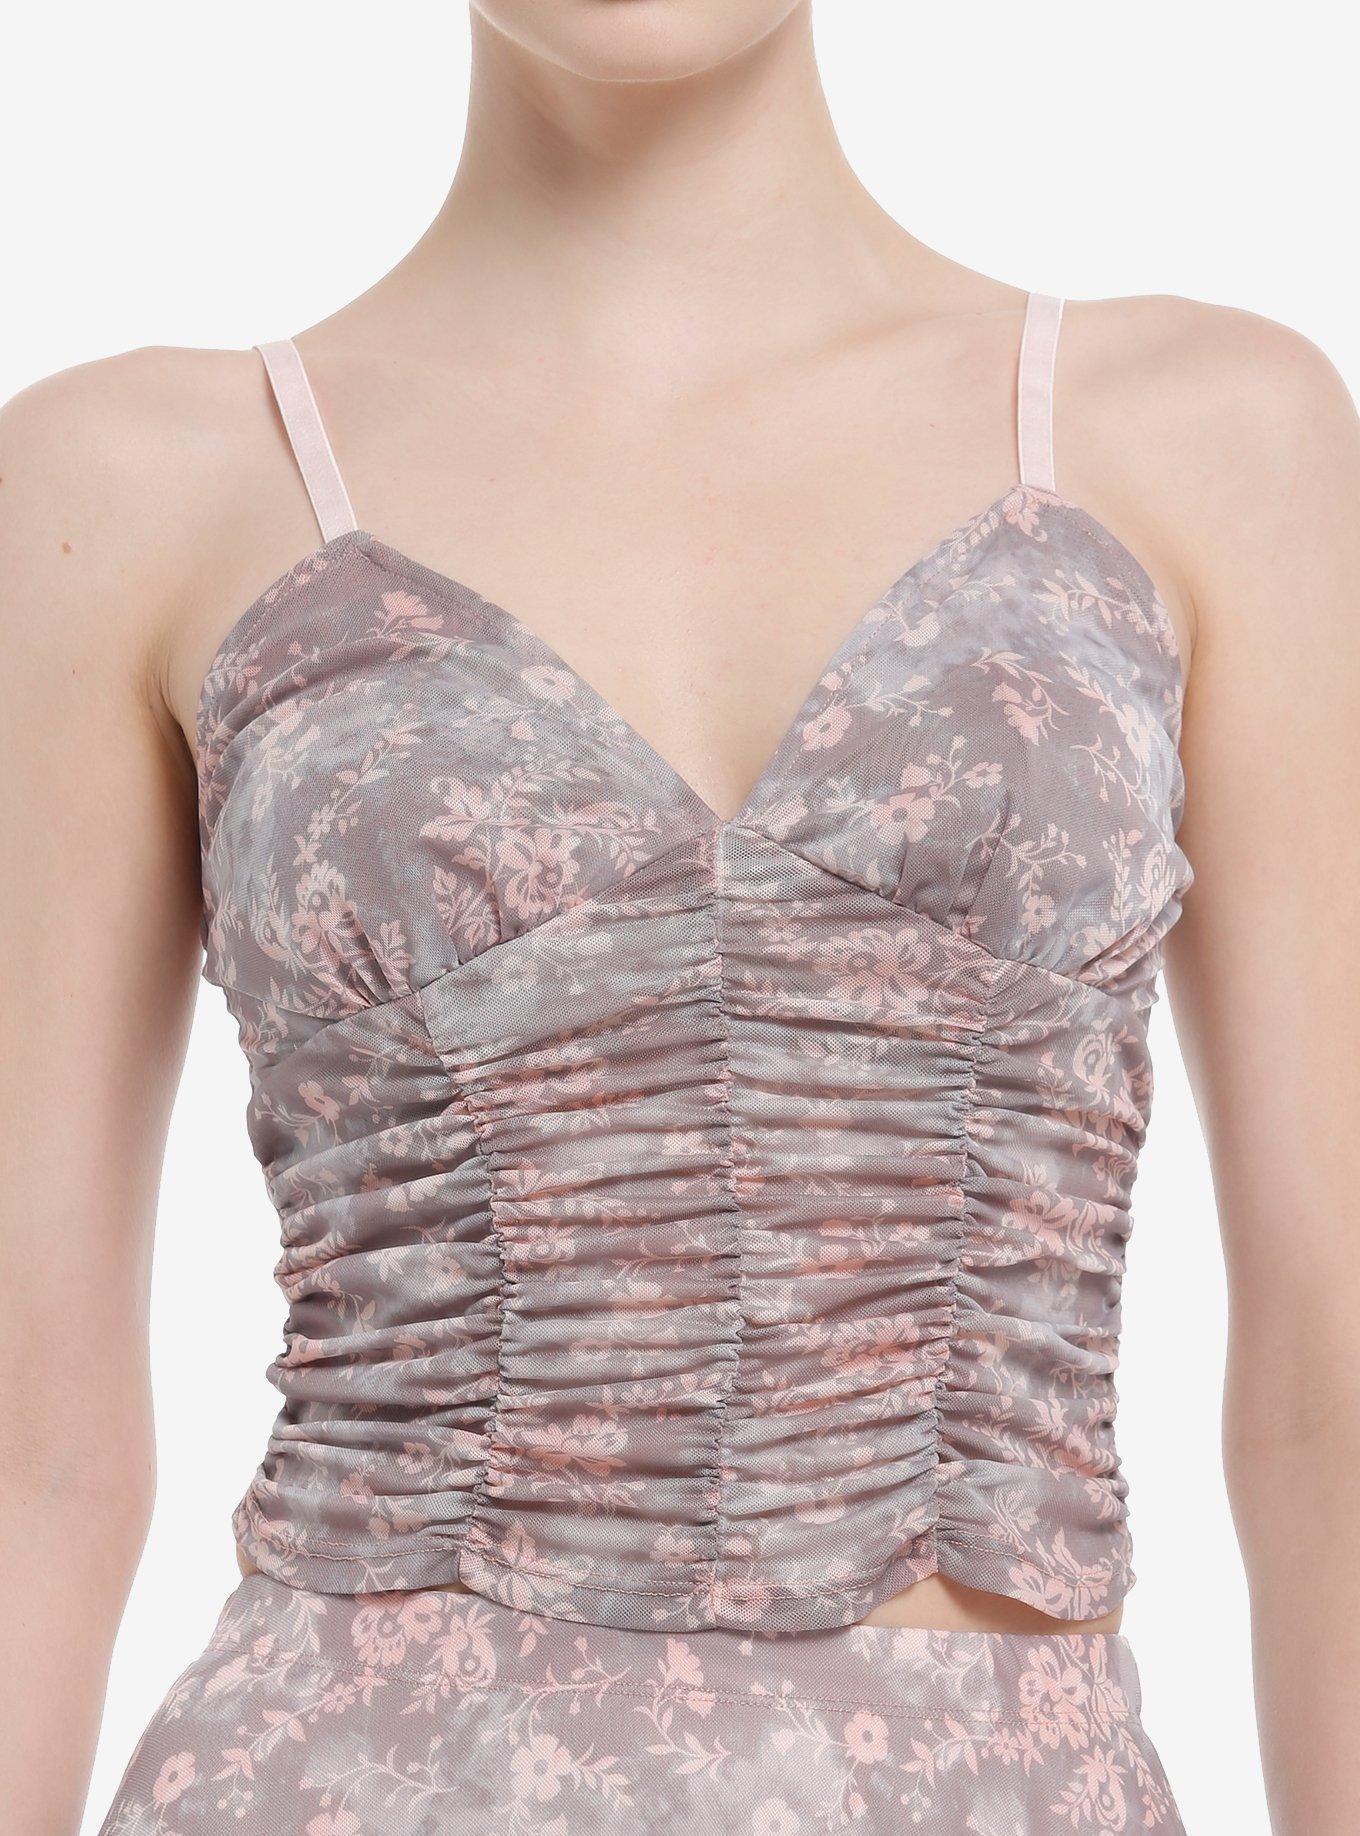 Thorn & Fable Pink Brown Floral Mesh Girls Tank Top